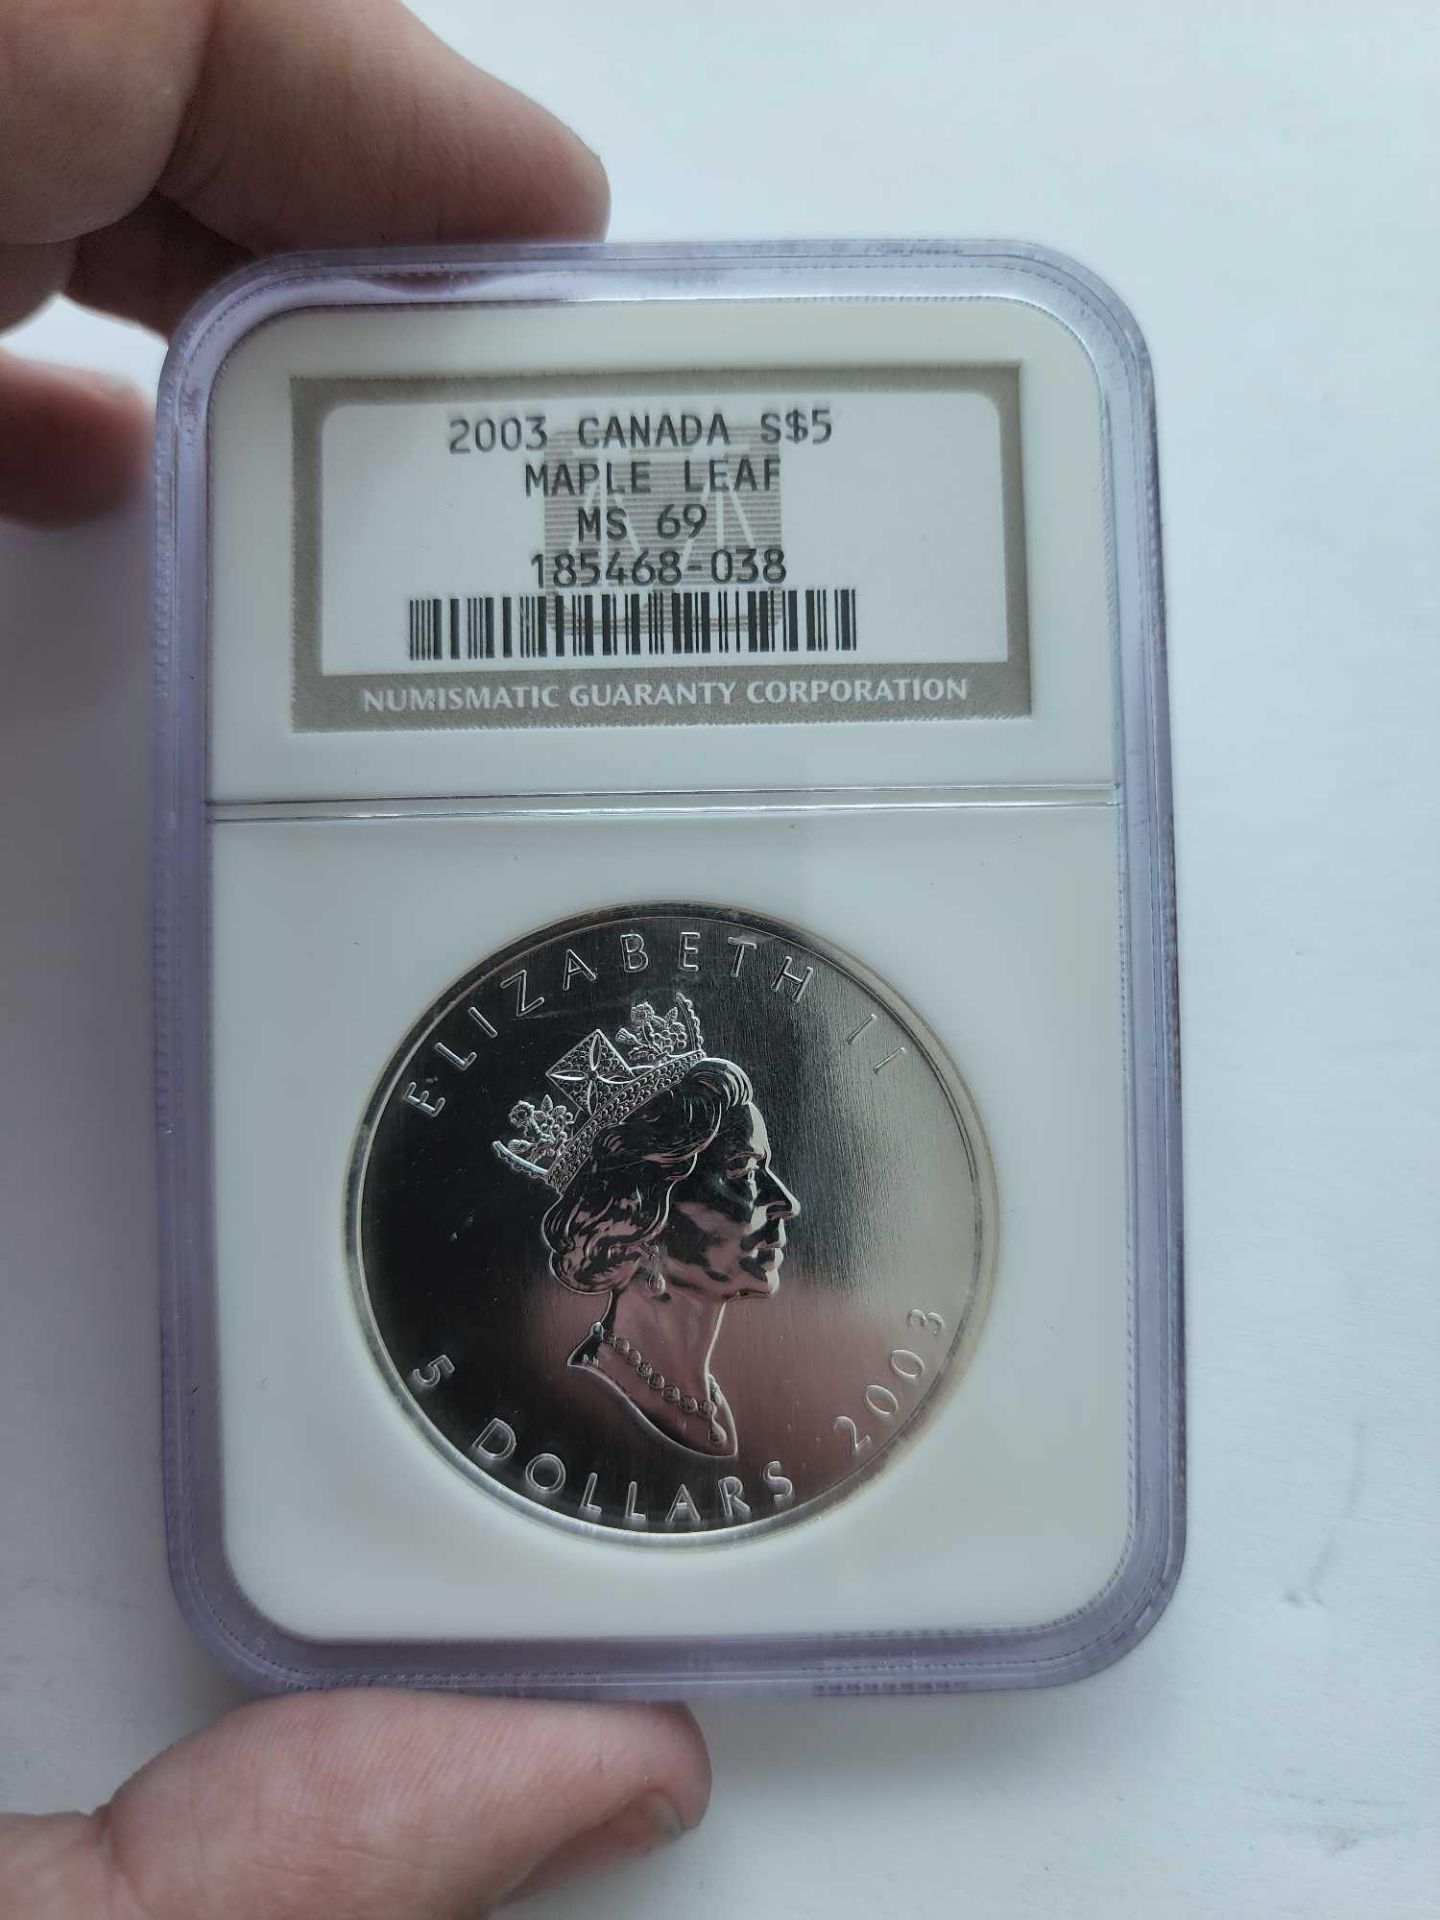 2003 Canadian maple leaf graded coin - Image 3 of 3